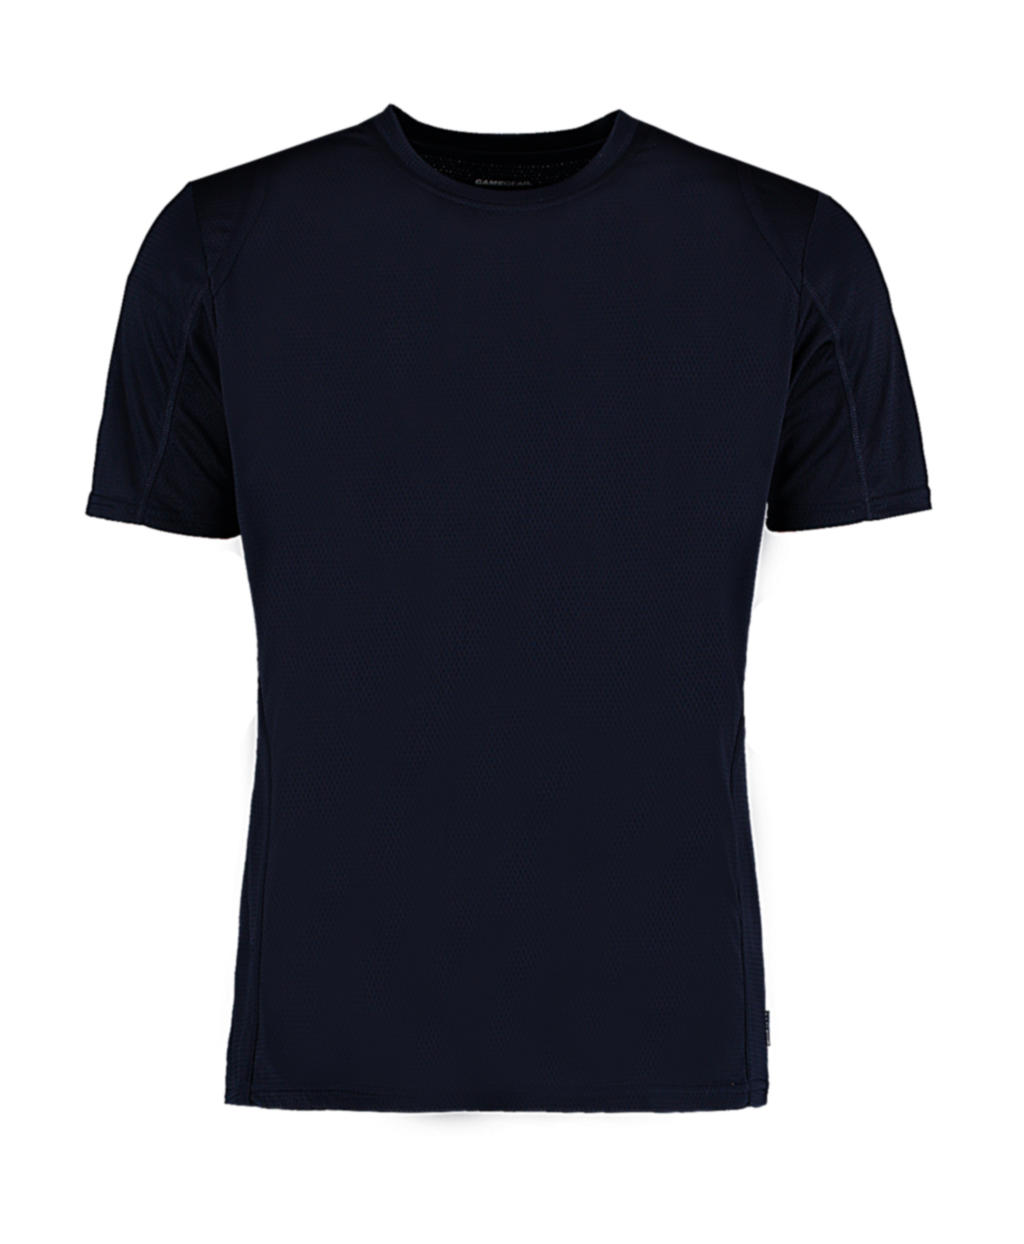  Regular Fit Cooltex? Contrast Tee in Farbe Navy/Navy